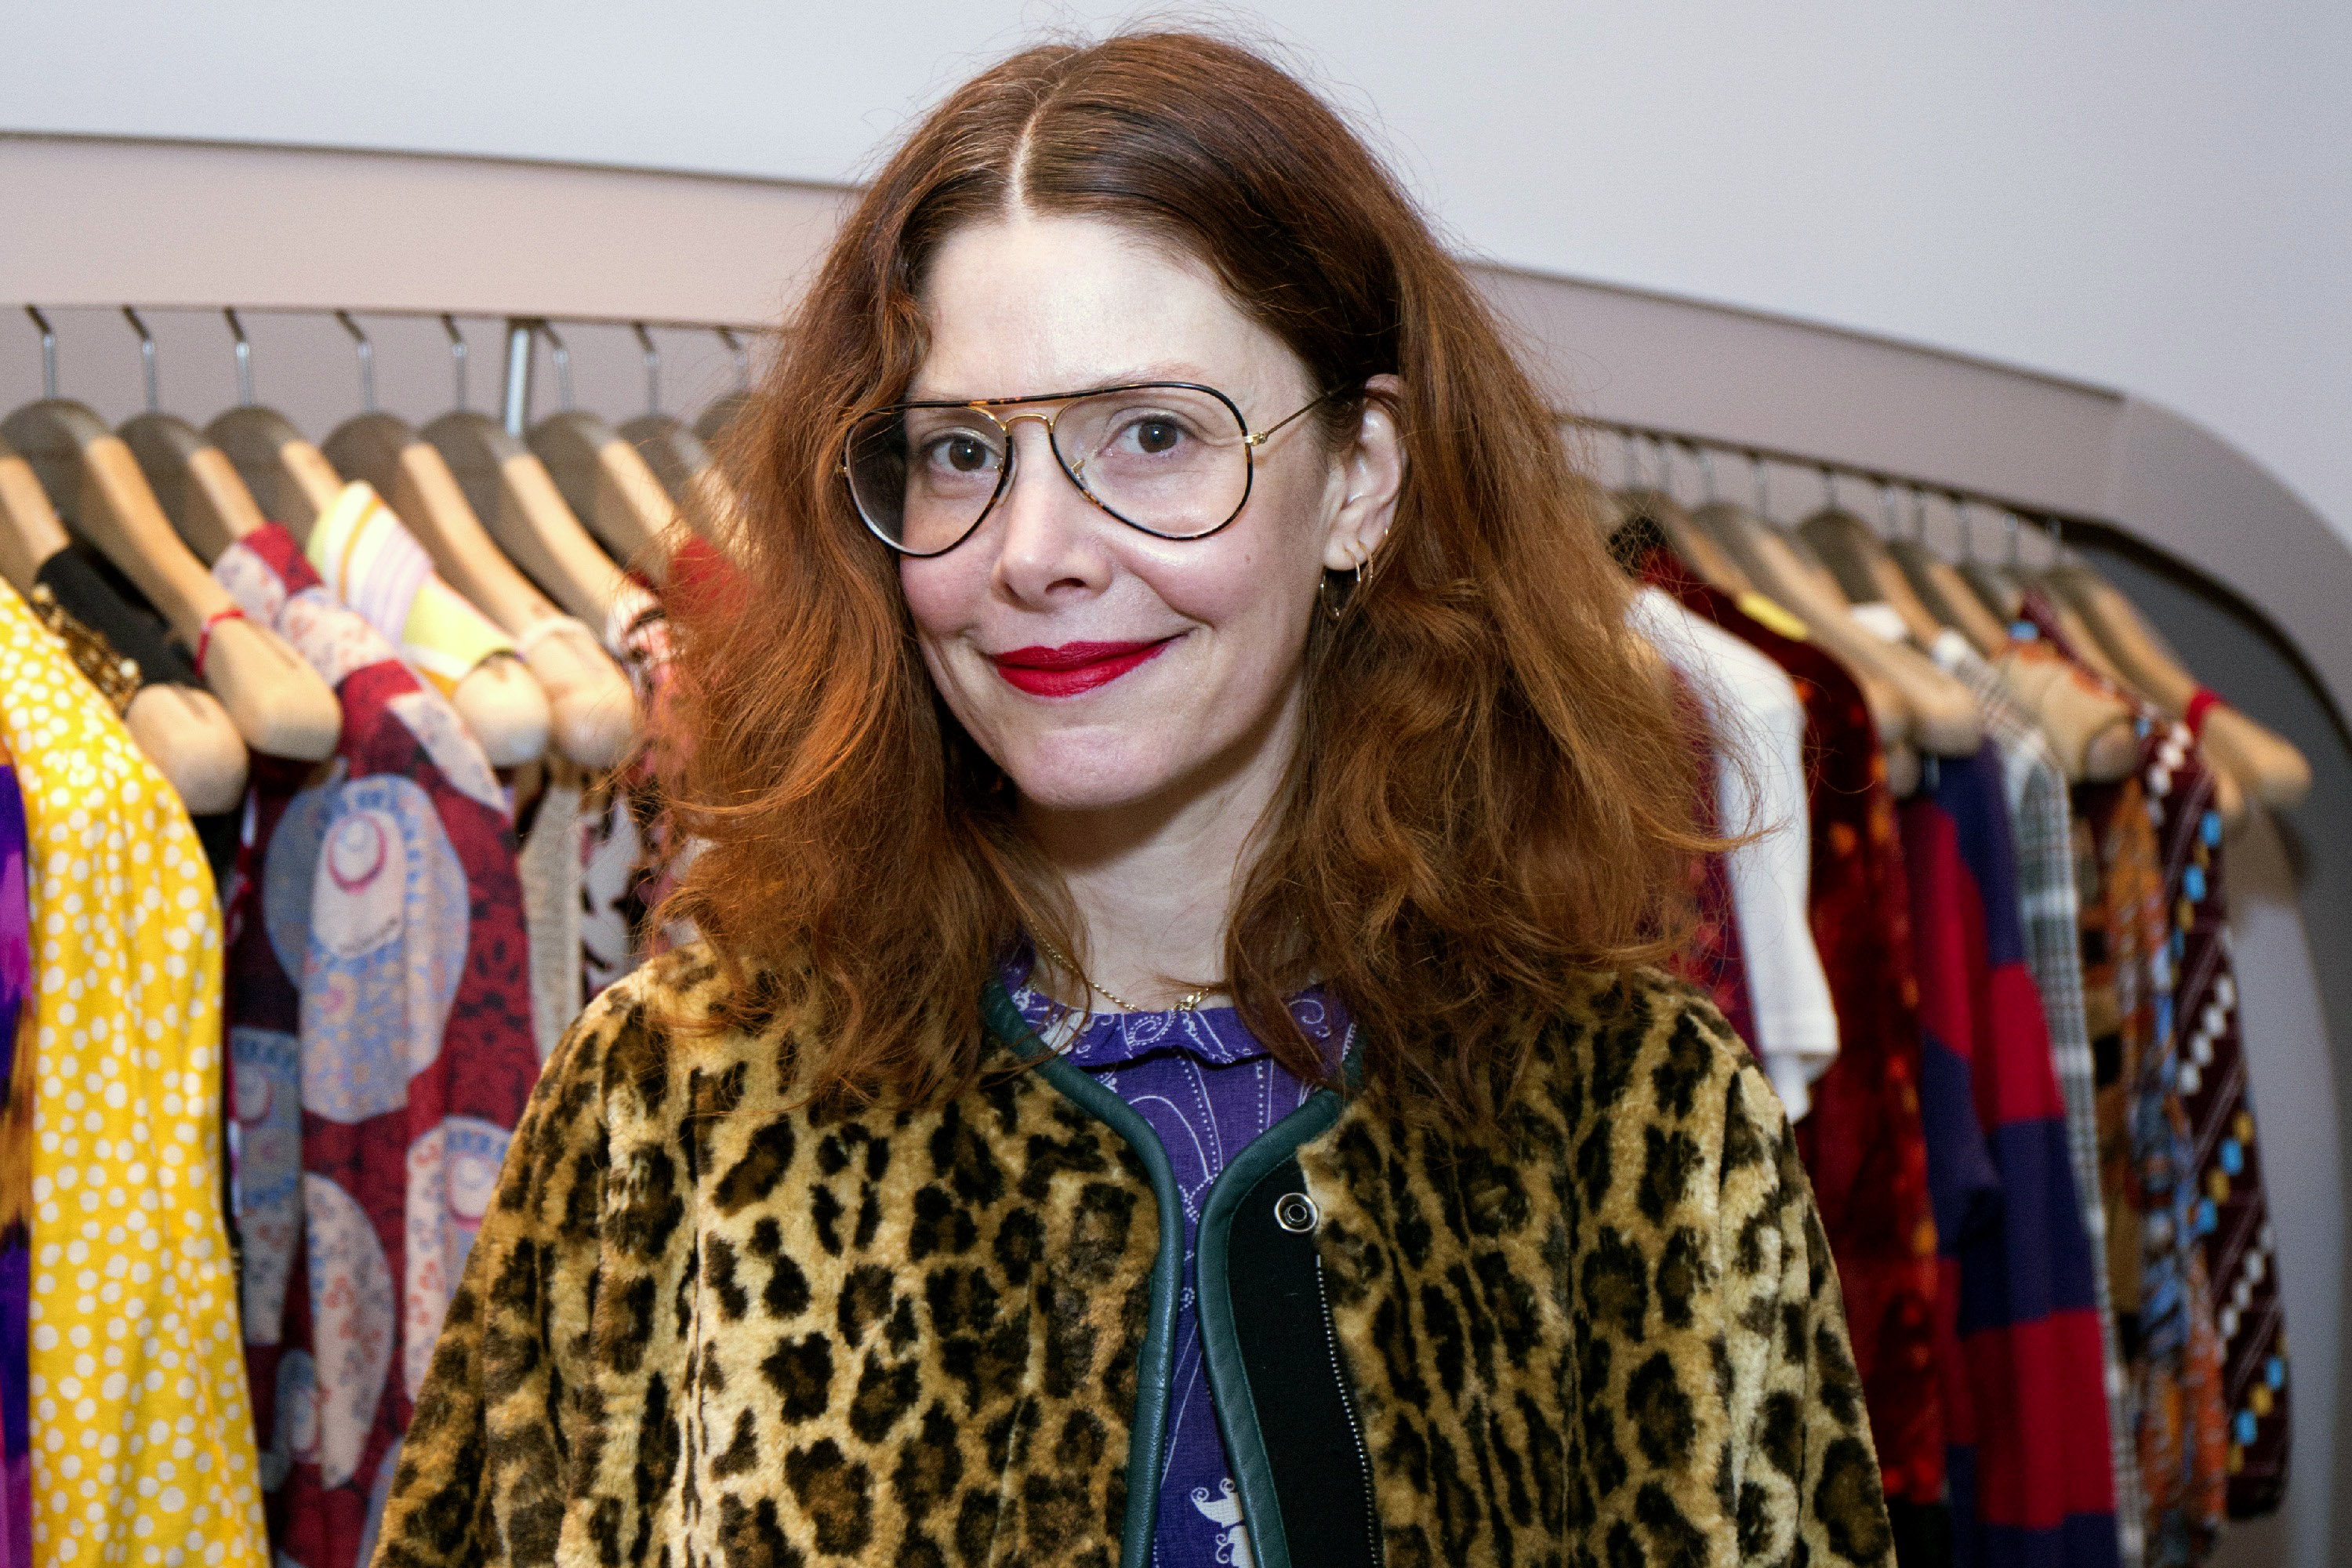 Refinery29 co-founder and former editor-in-chief Christene Barberich